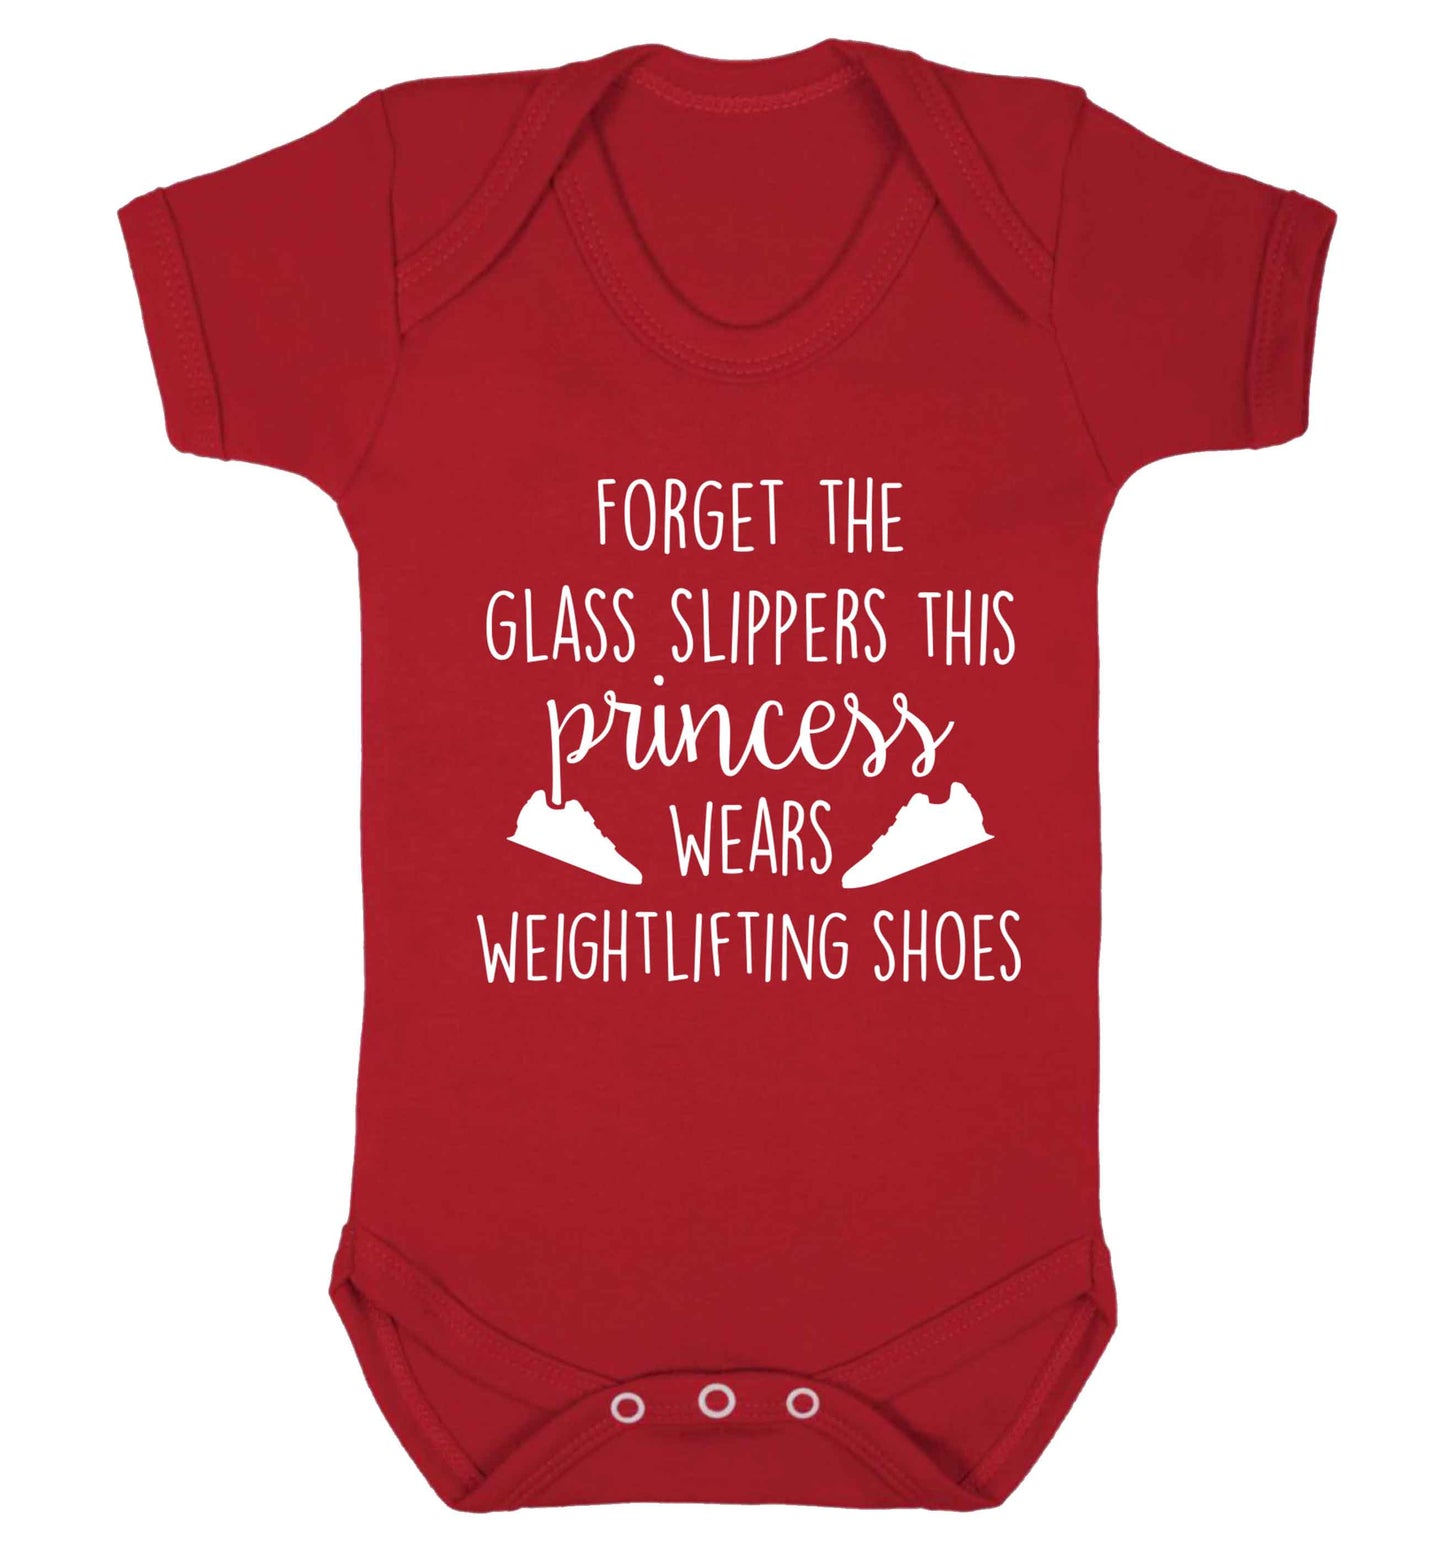 Forget the glass slippers this princess wears weightlifting shoes Baby Vest red 18-24 months